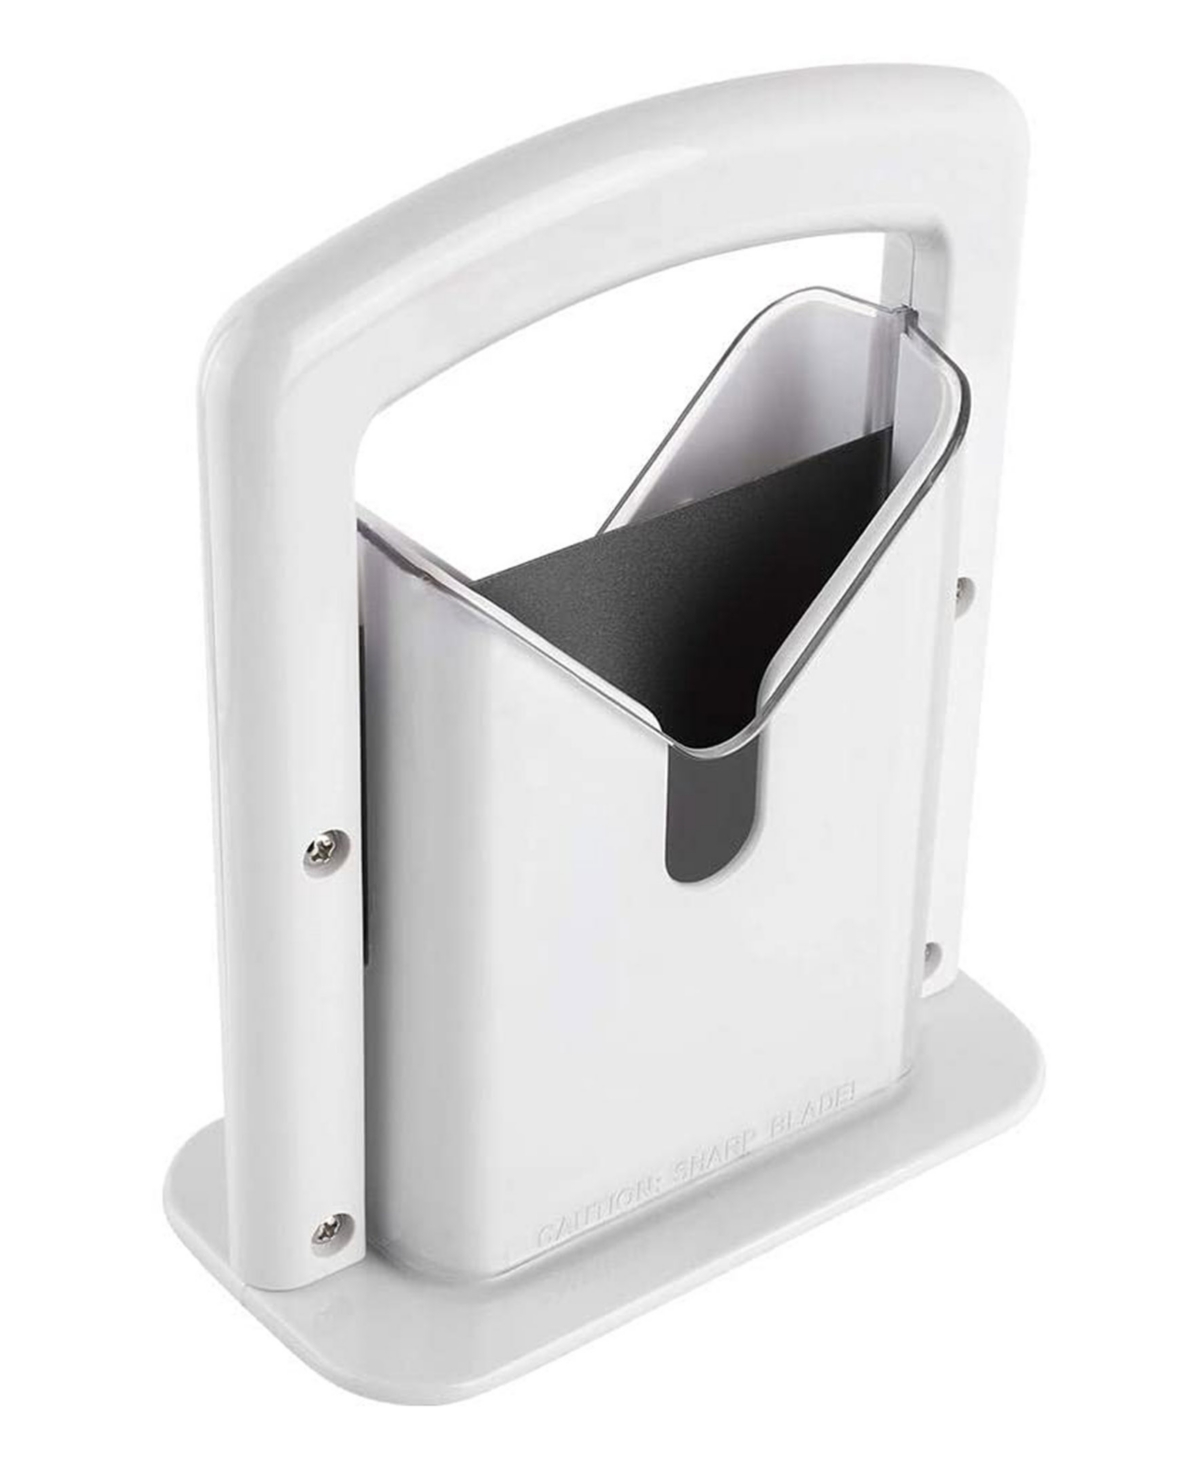 Cheer Collection Guillotine Style Bagel Slicer With Safety Shield In Gray